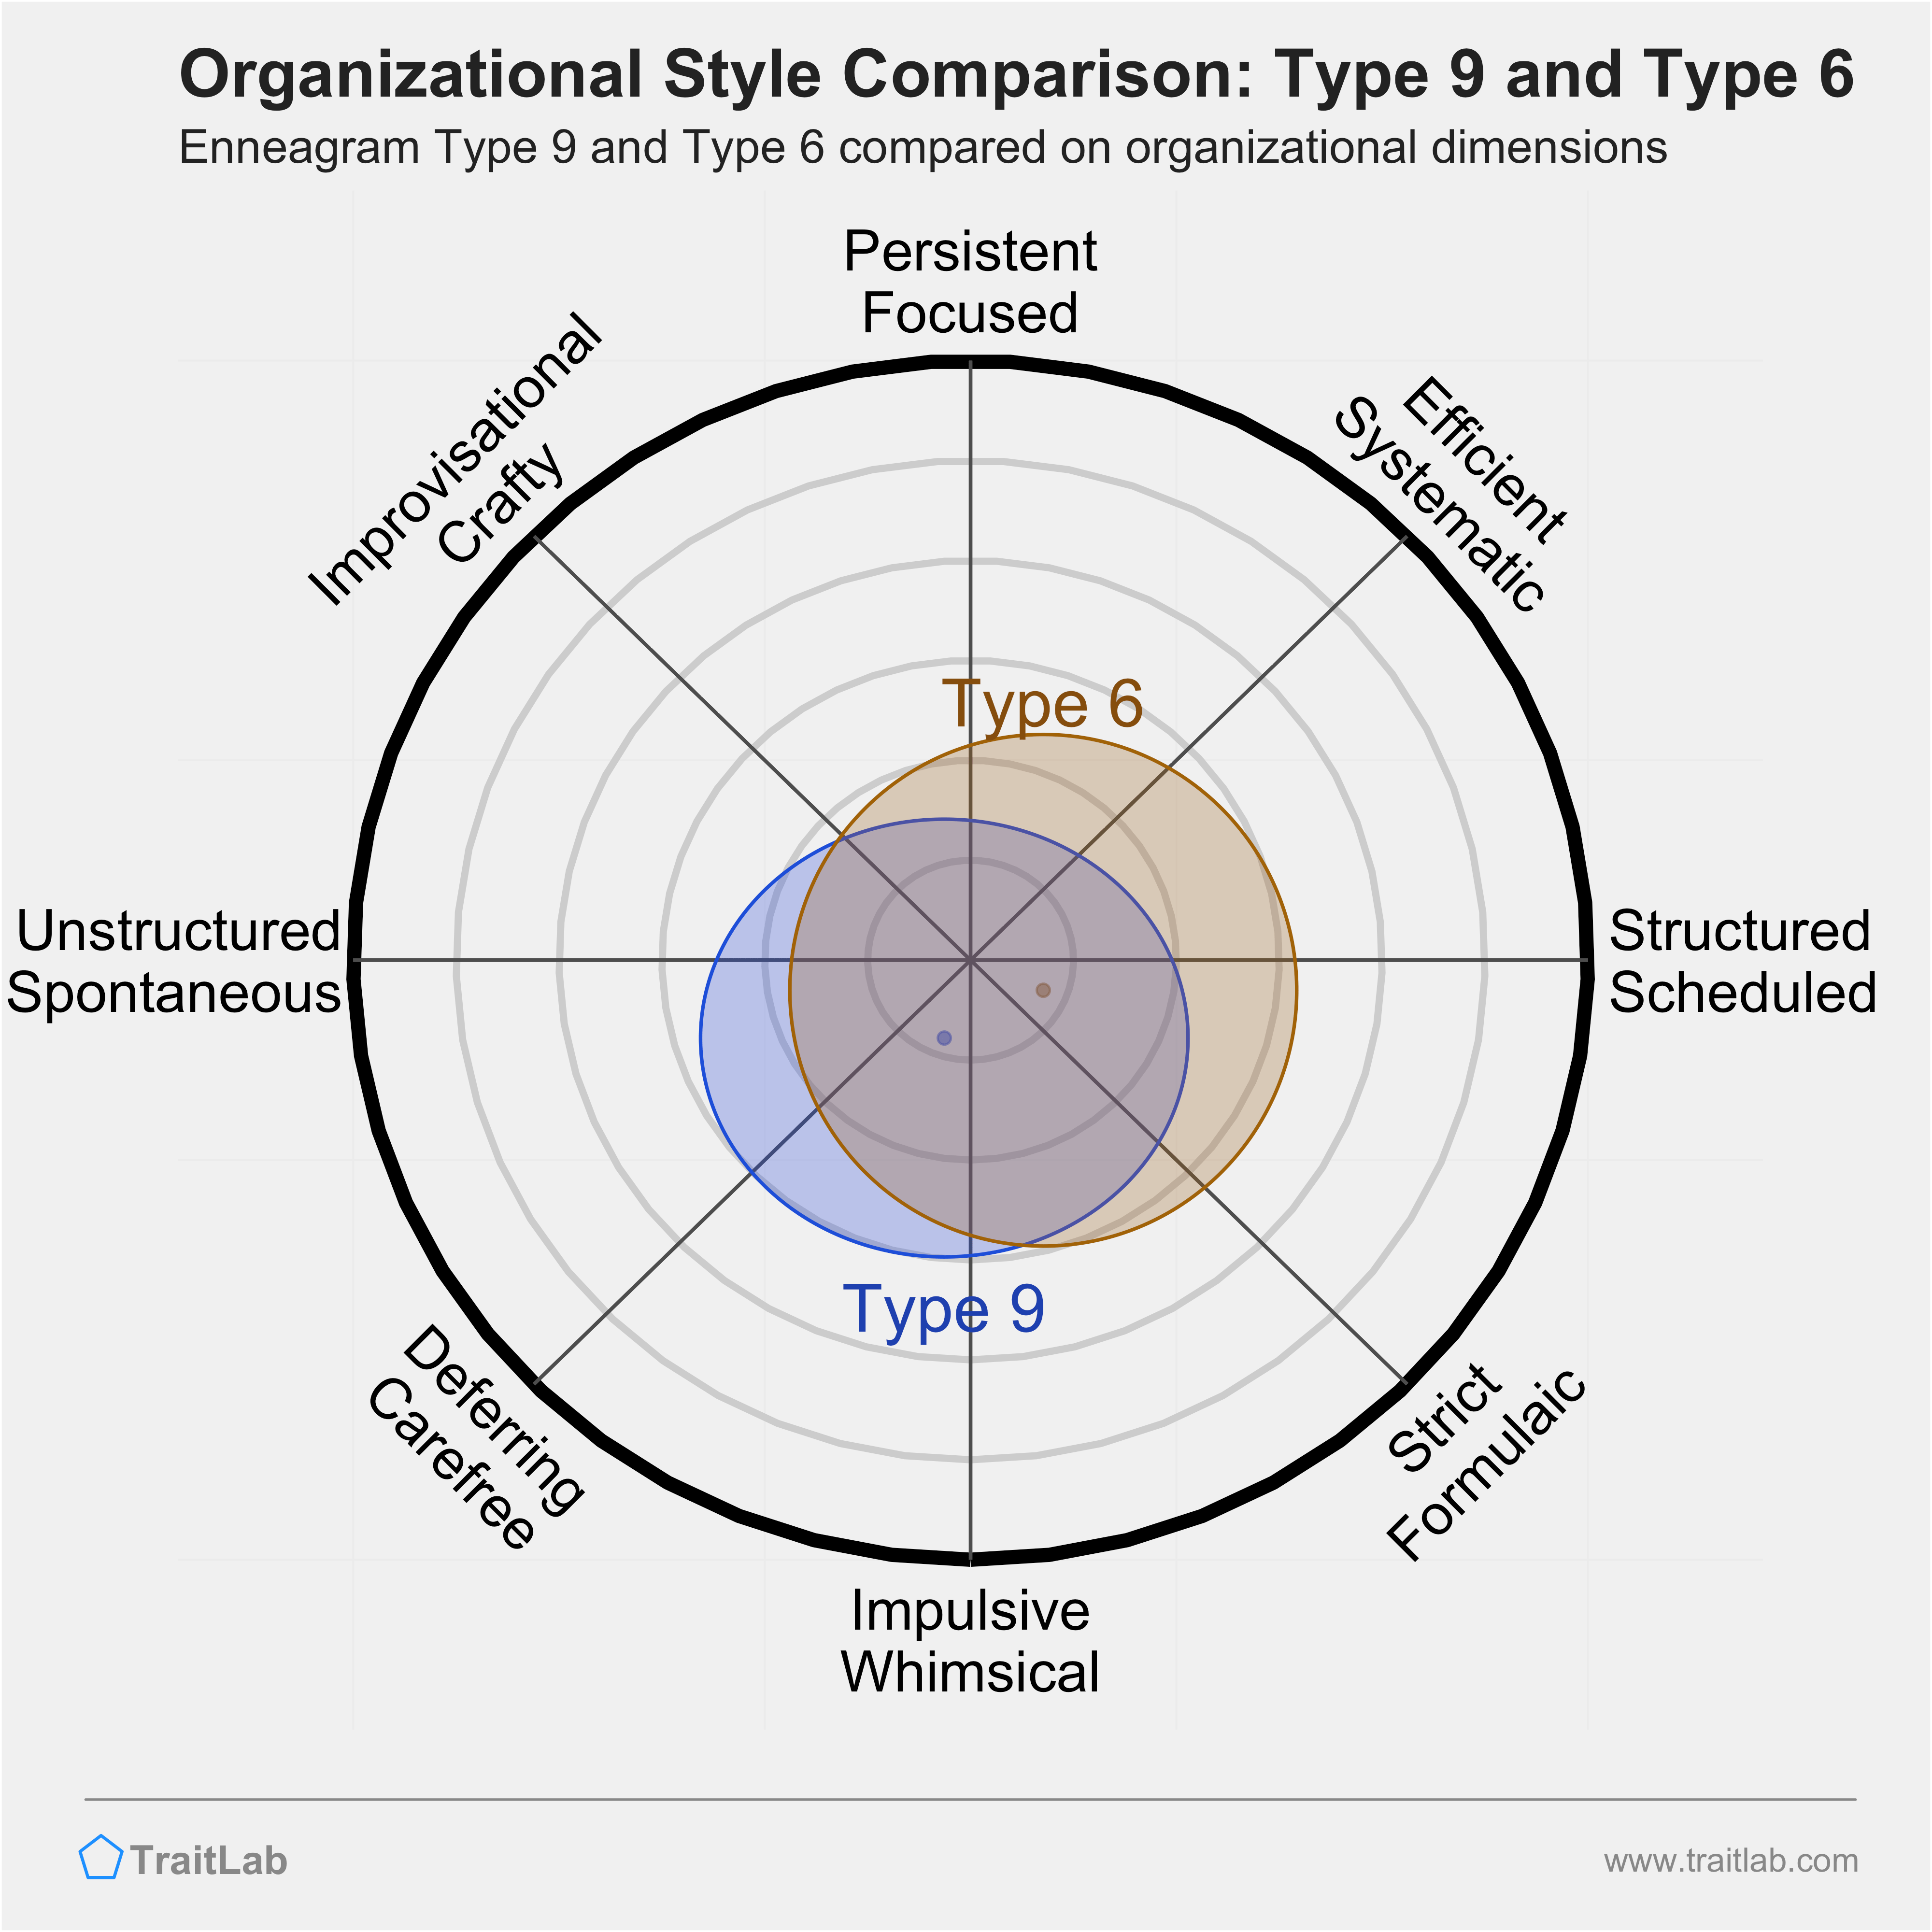 Type 9 and Type 6 comparison across organizational dimensions